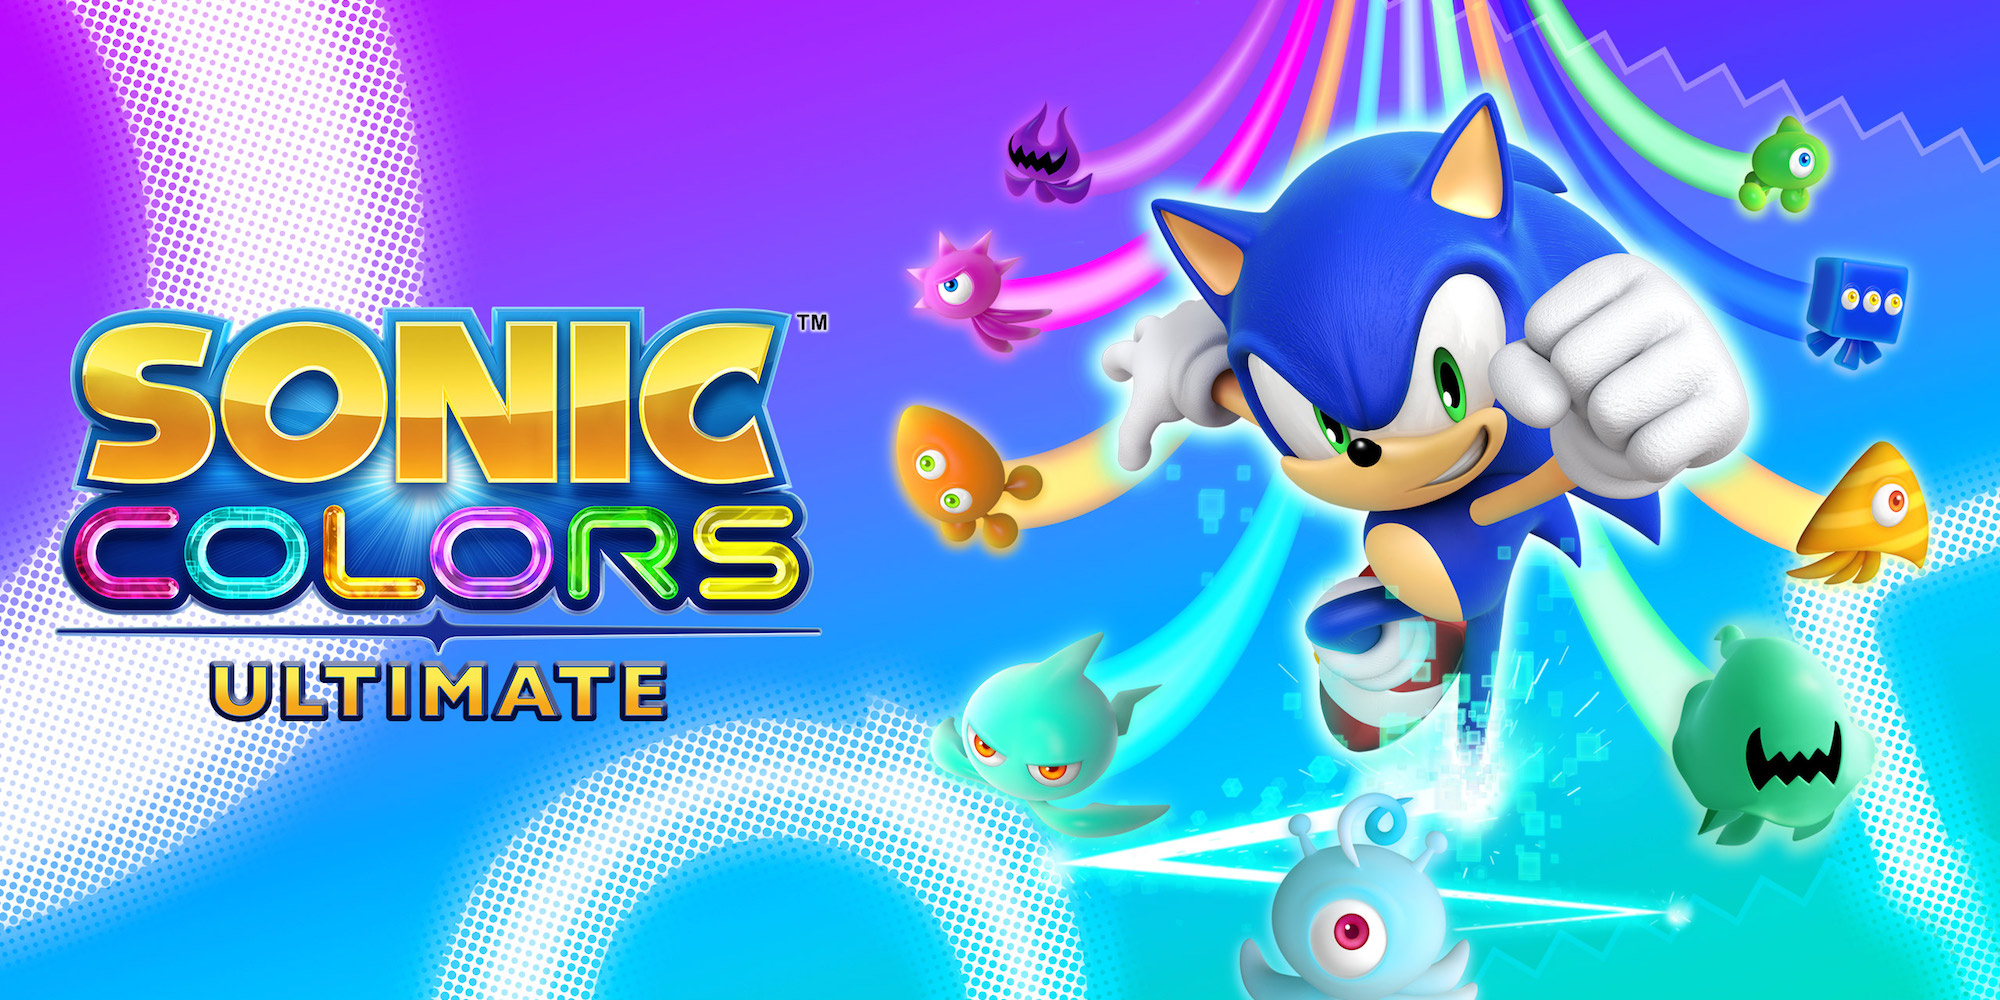 Sonic Mania Nintendo Switch Game Deals for Nintendo Switch OLED